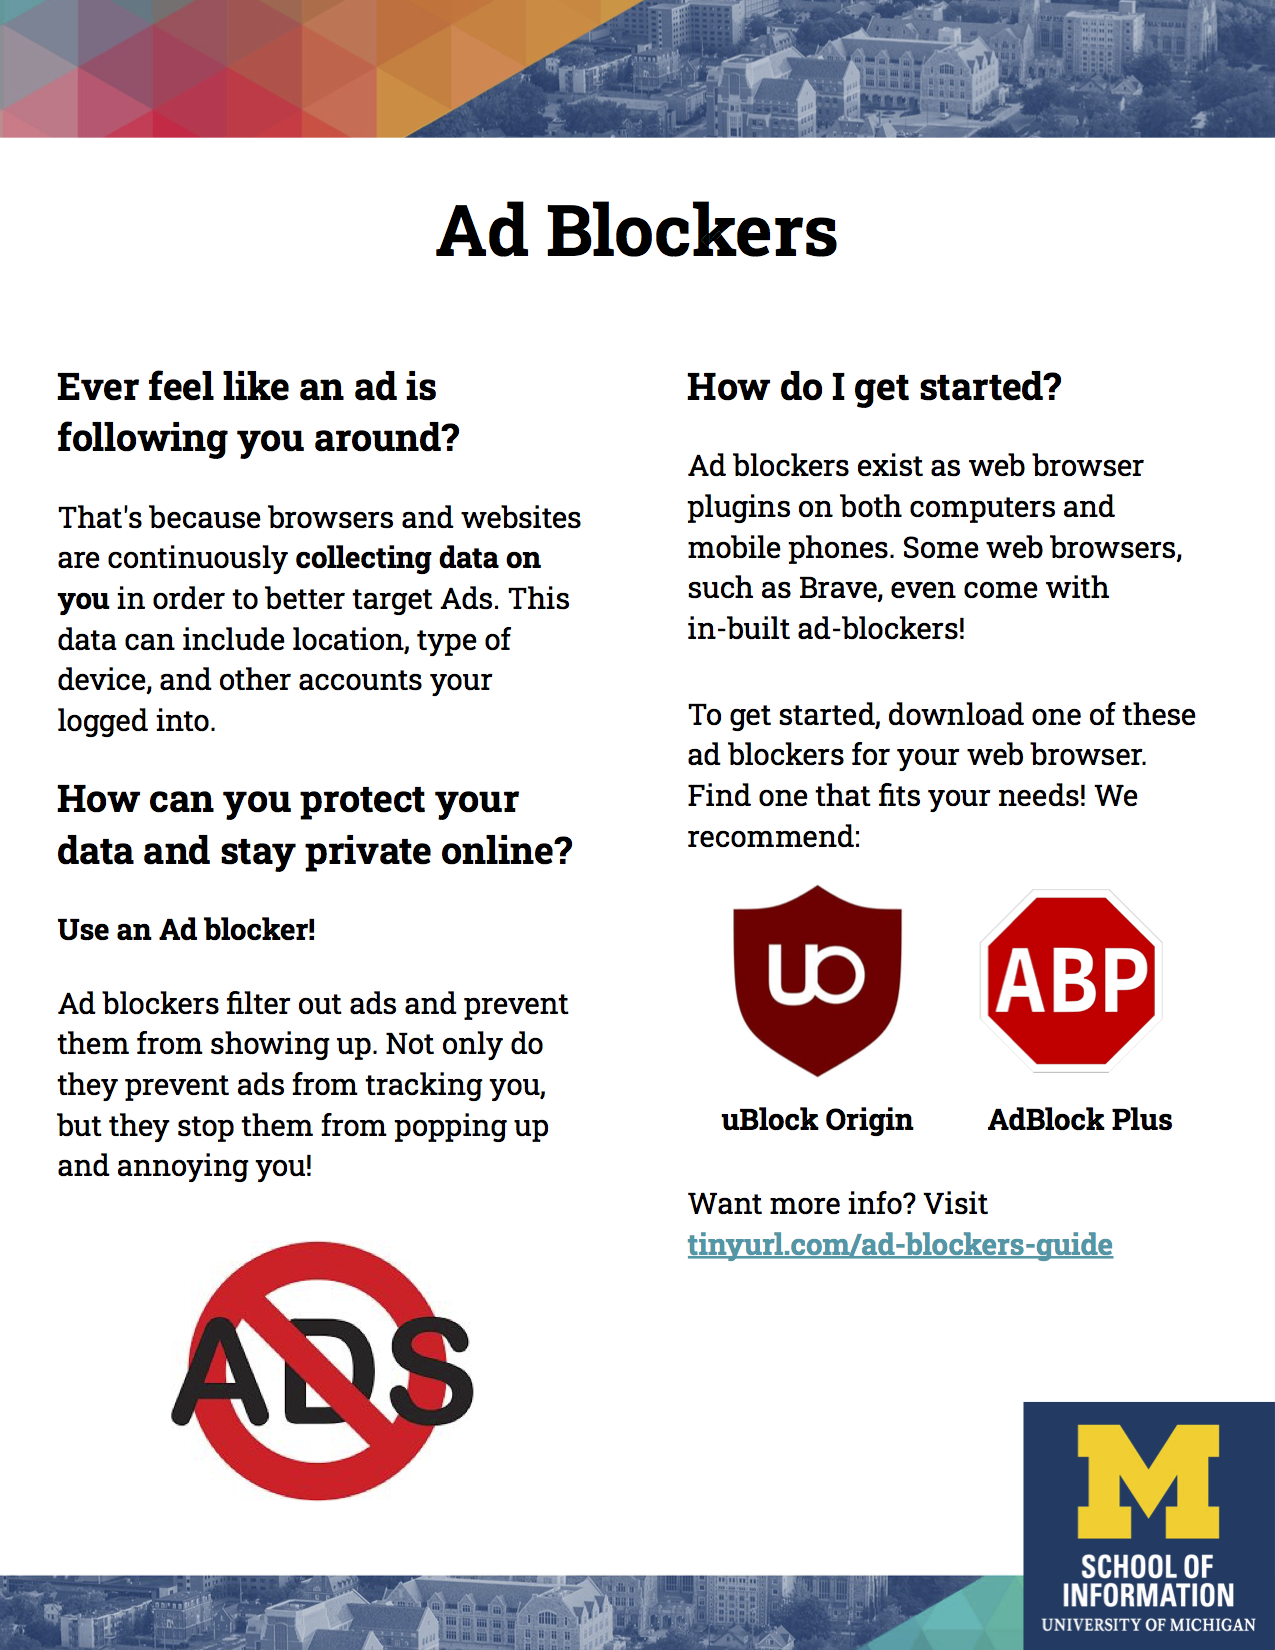 Preview of the Ad Blocker poster